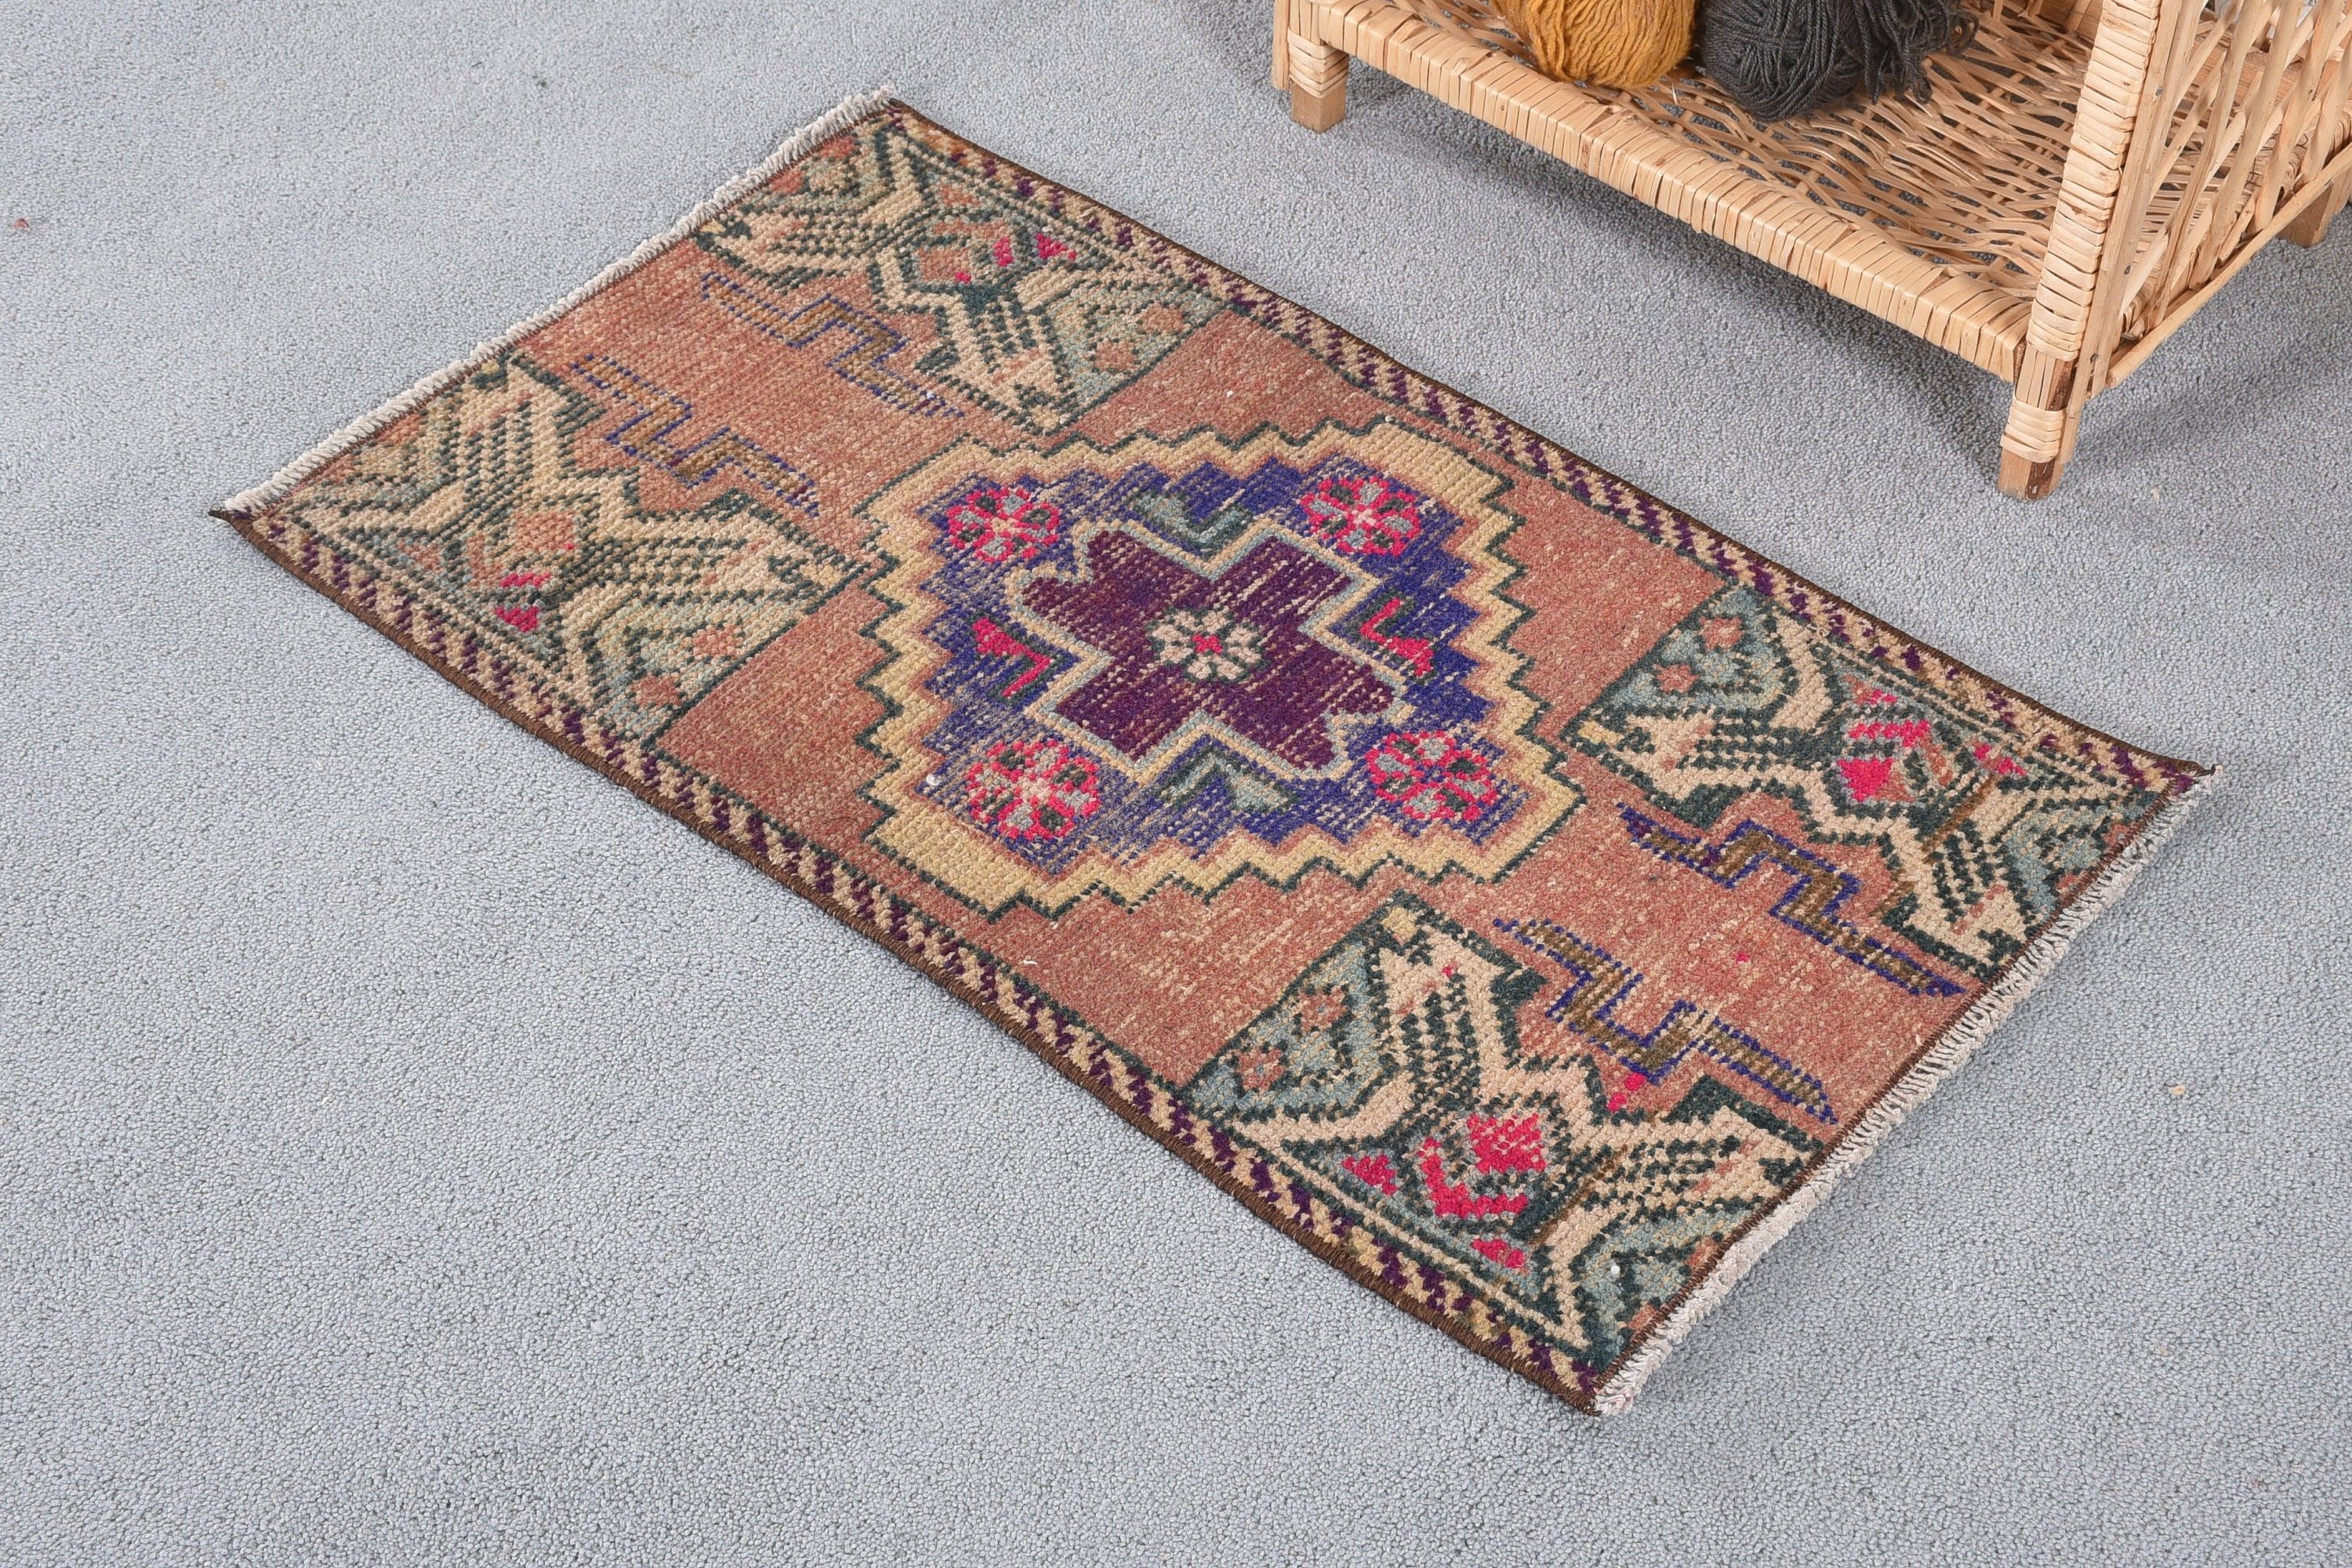 Floor Rugs, Car Mat Rug, 1.5x2.8 ft Small Rug, Pale Rug, Rugs for Entry, Brown Cool Rug, Cool Rug, Turkish Rug, Vintage Rugs, Kitchen Rug